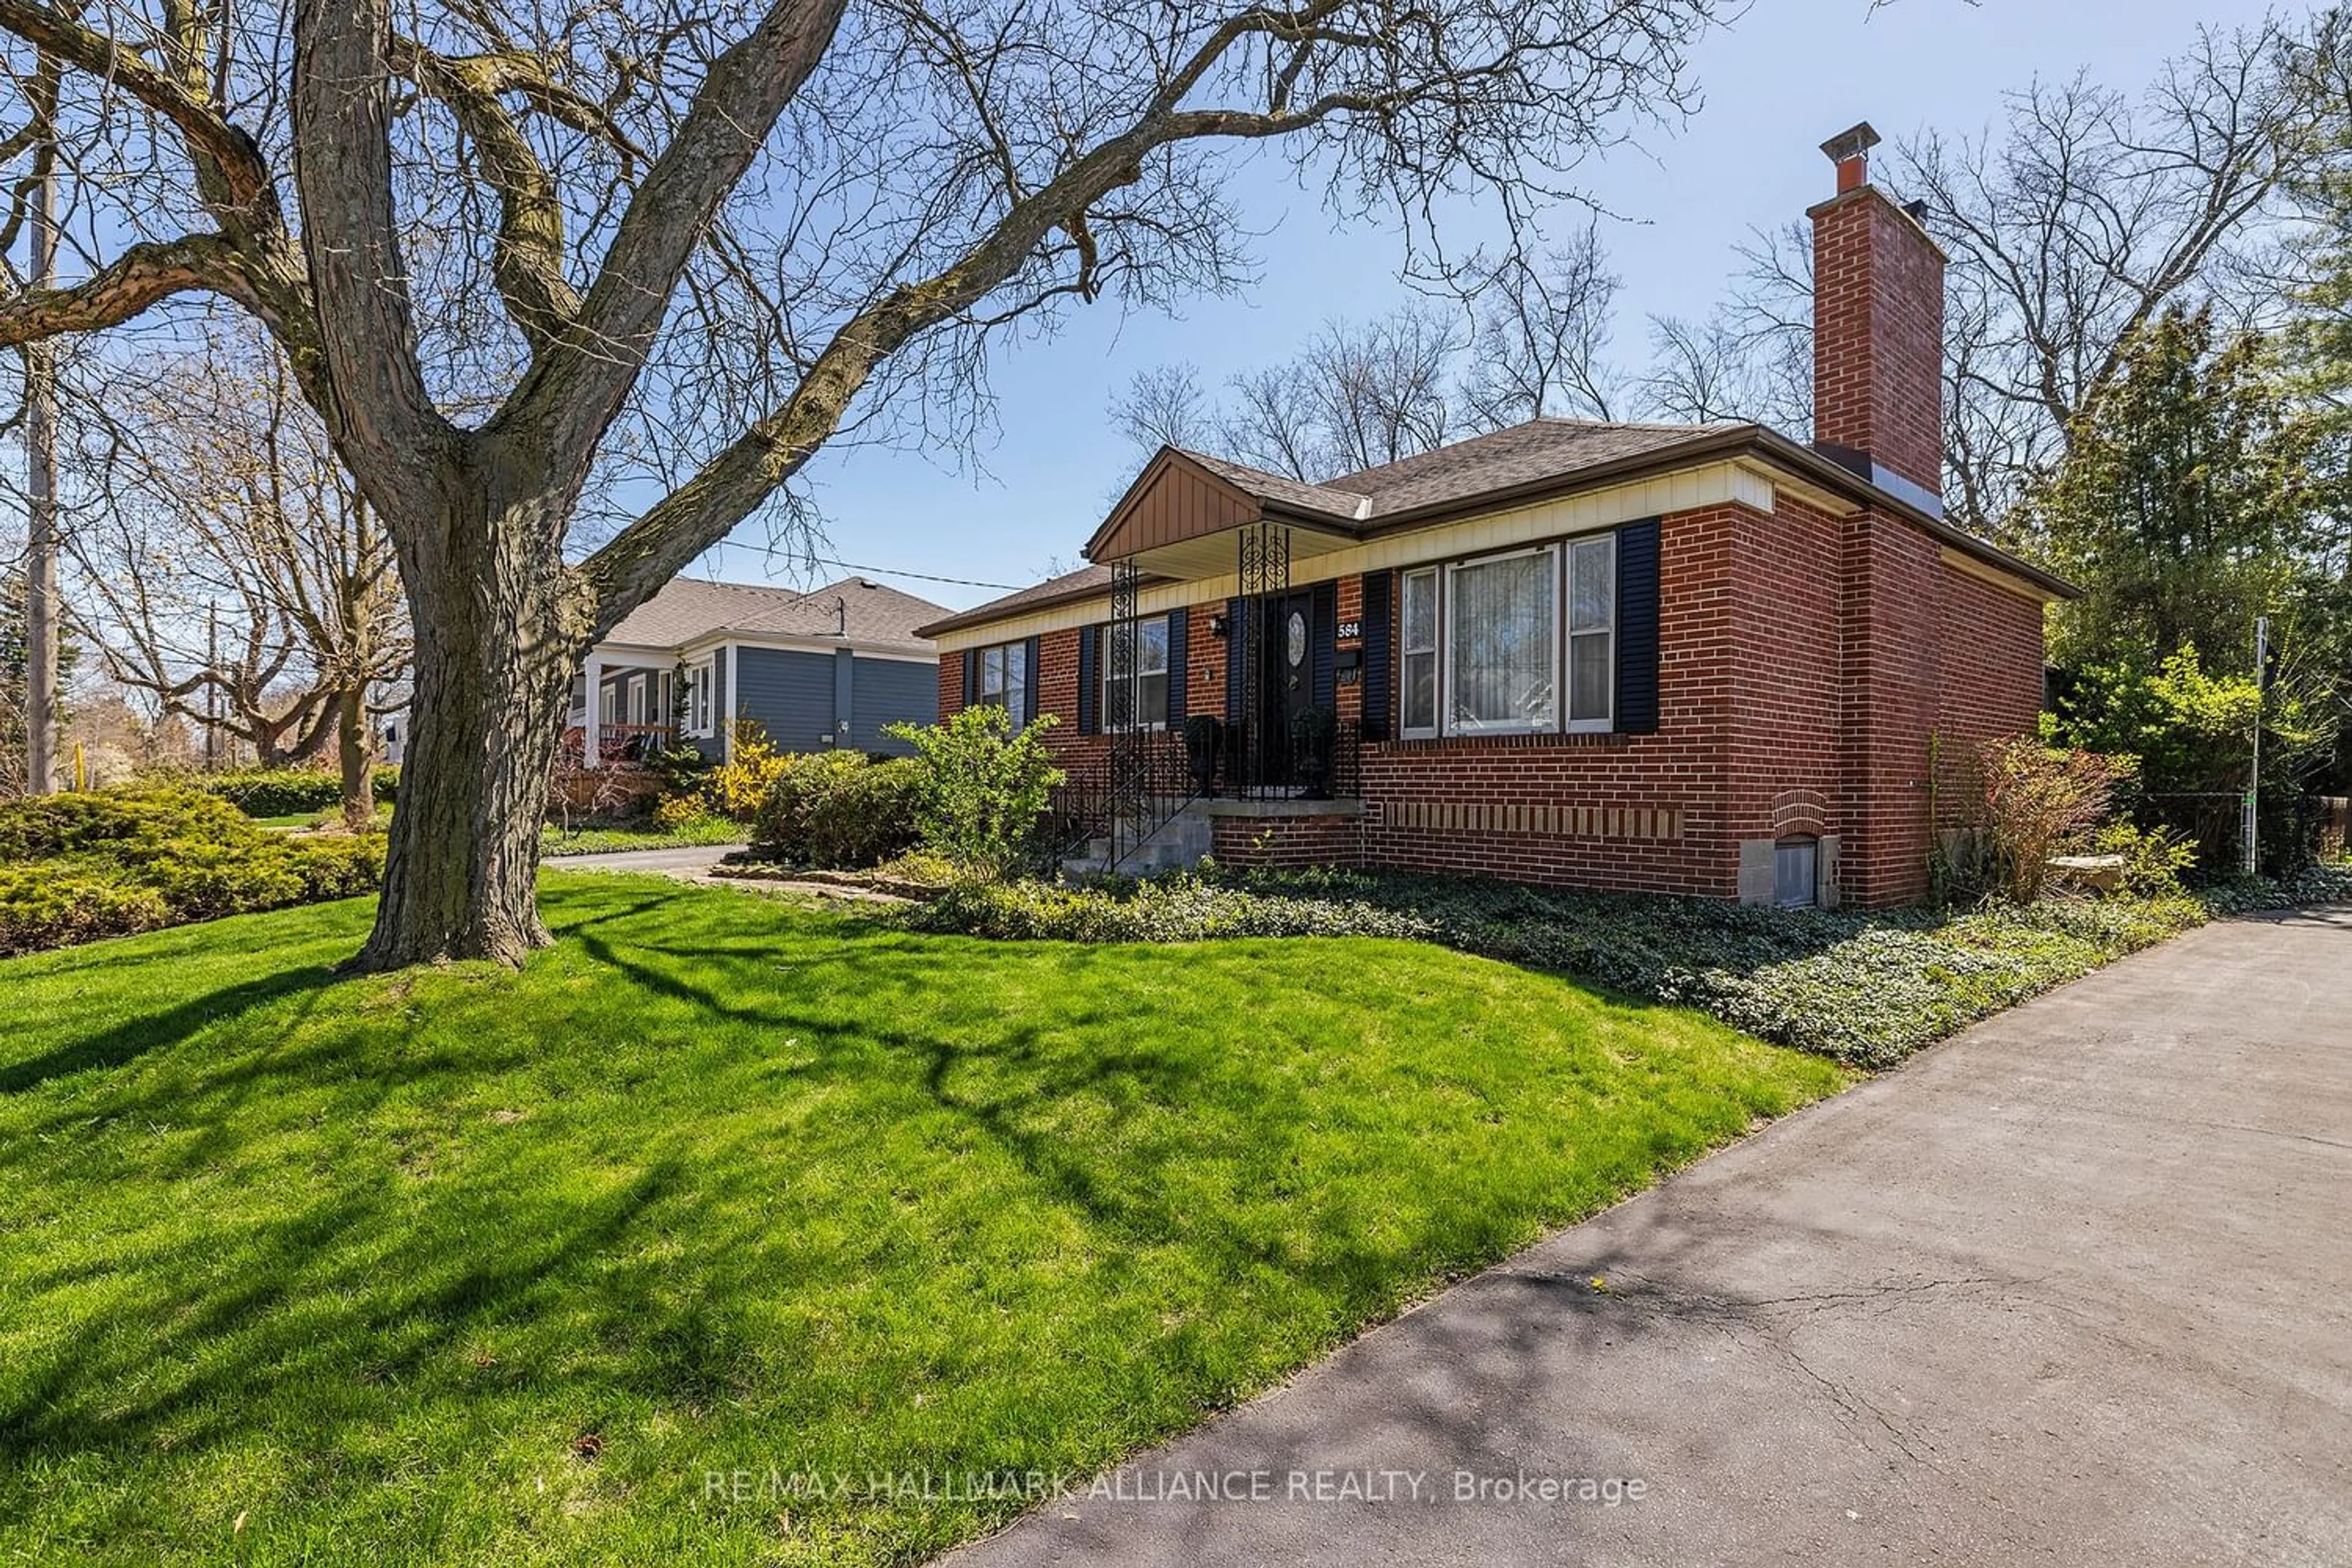 Home with brick exterior material for 584 Lorne St, Burlington Ontario L7R 2T6